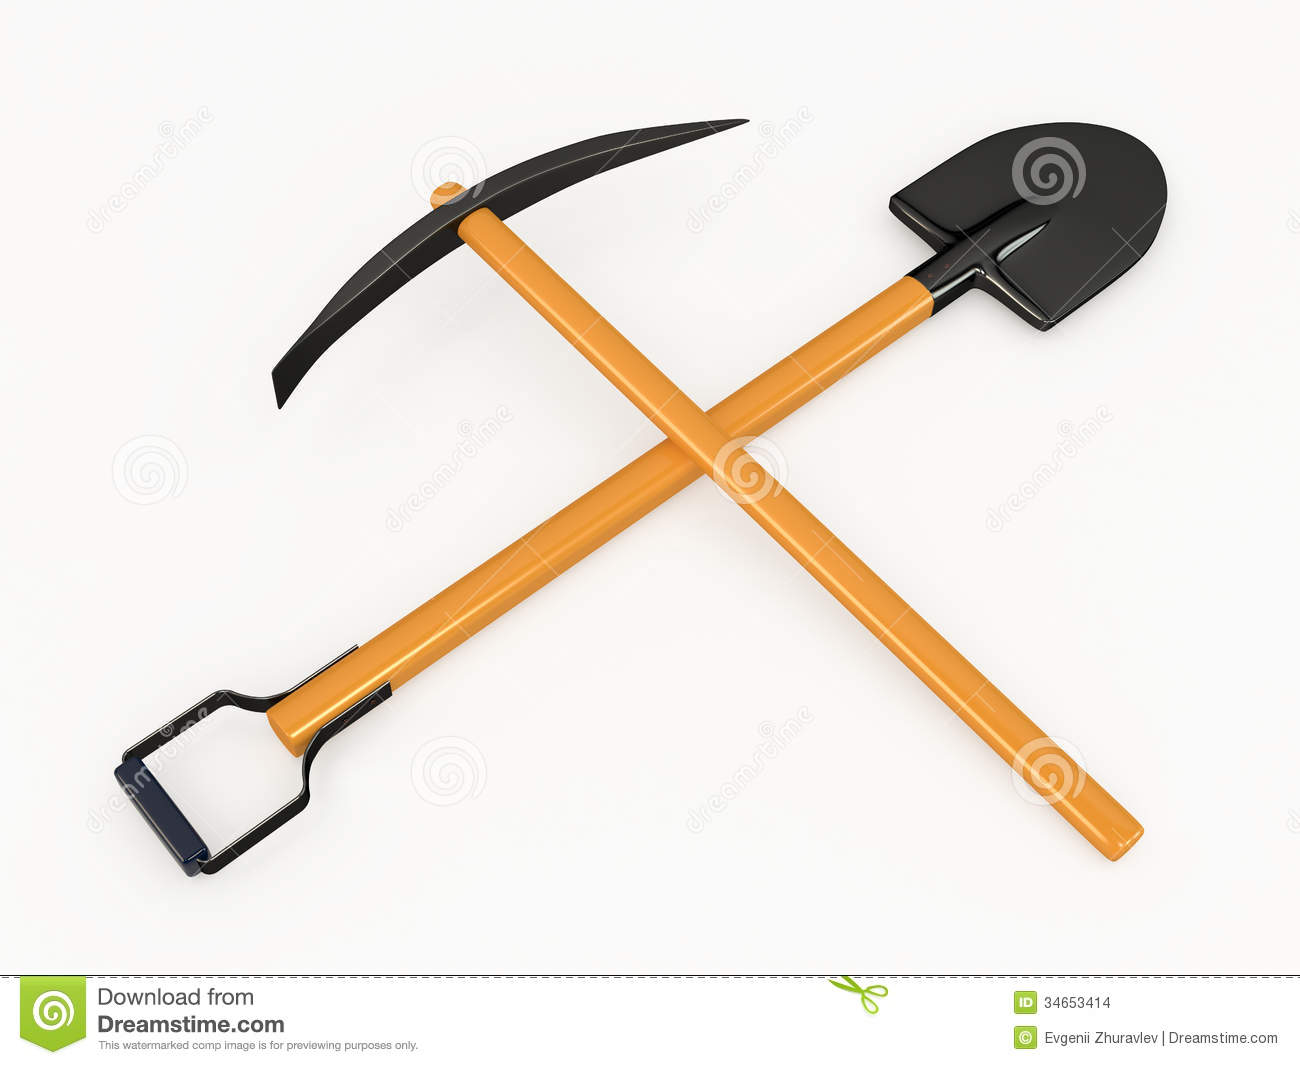 Shovel And Pick 3d Stock Images   Image  34653414